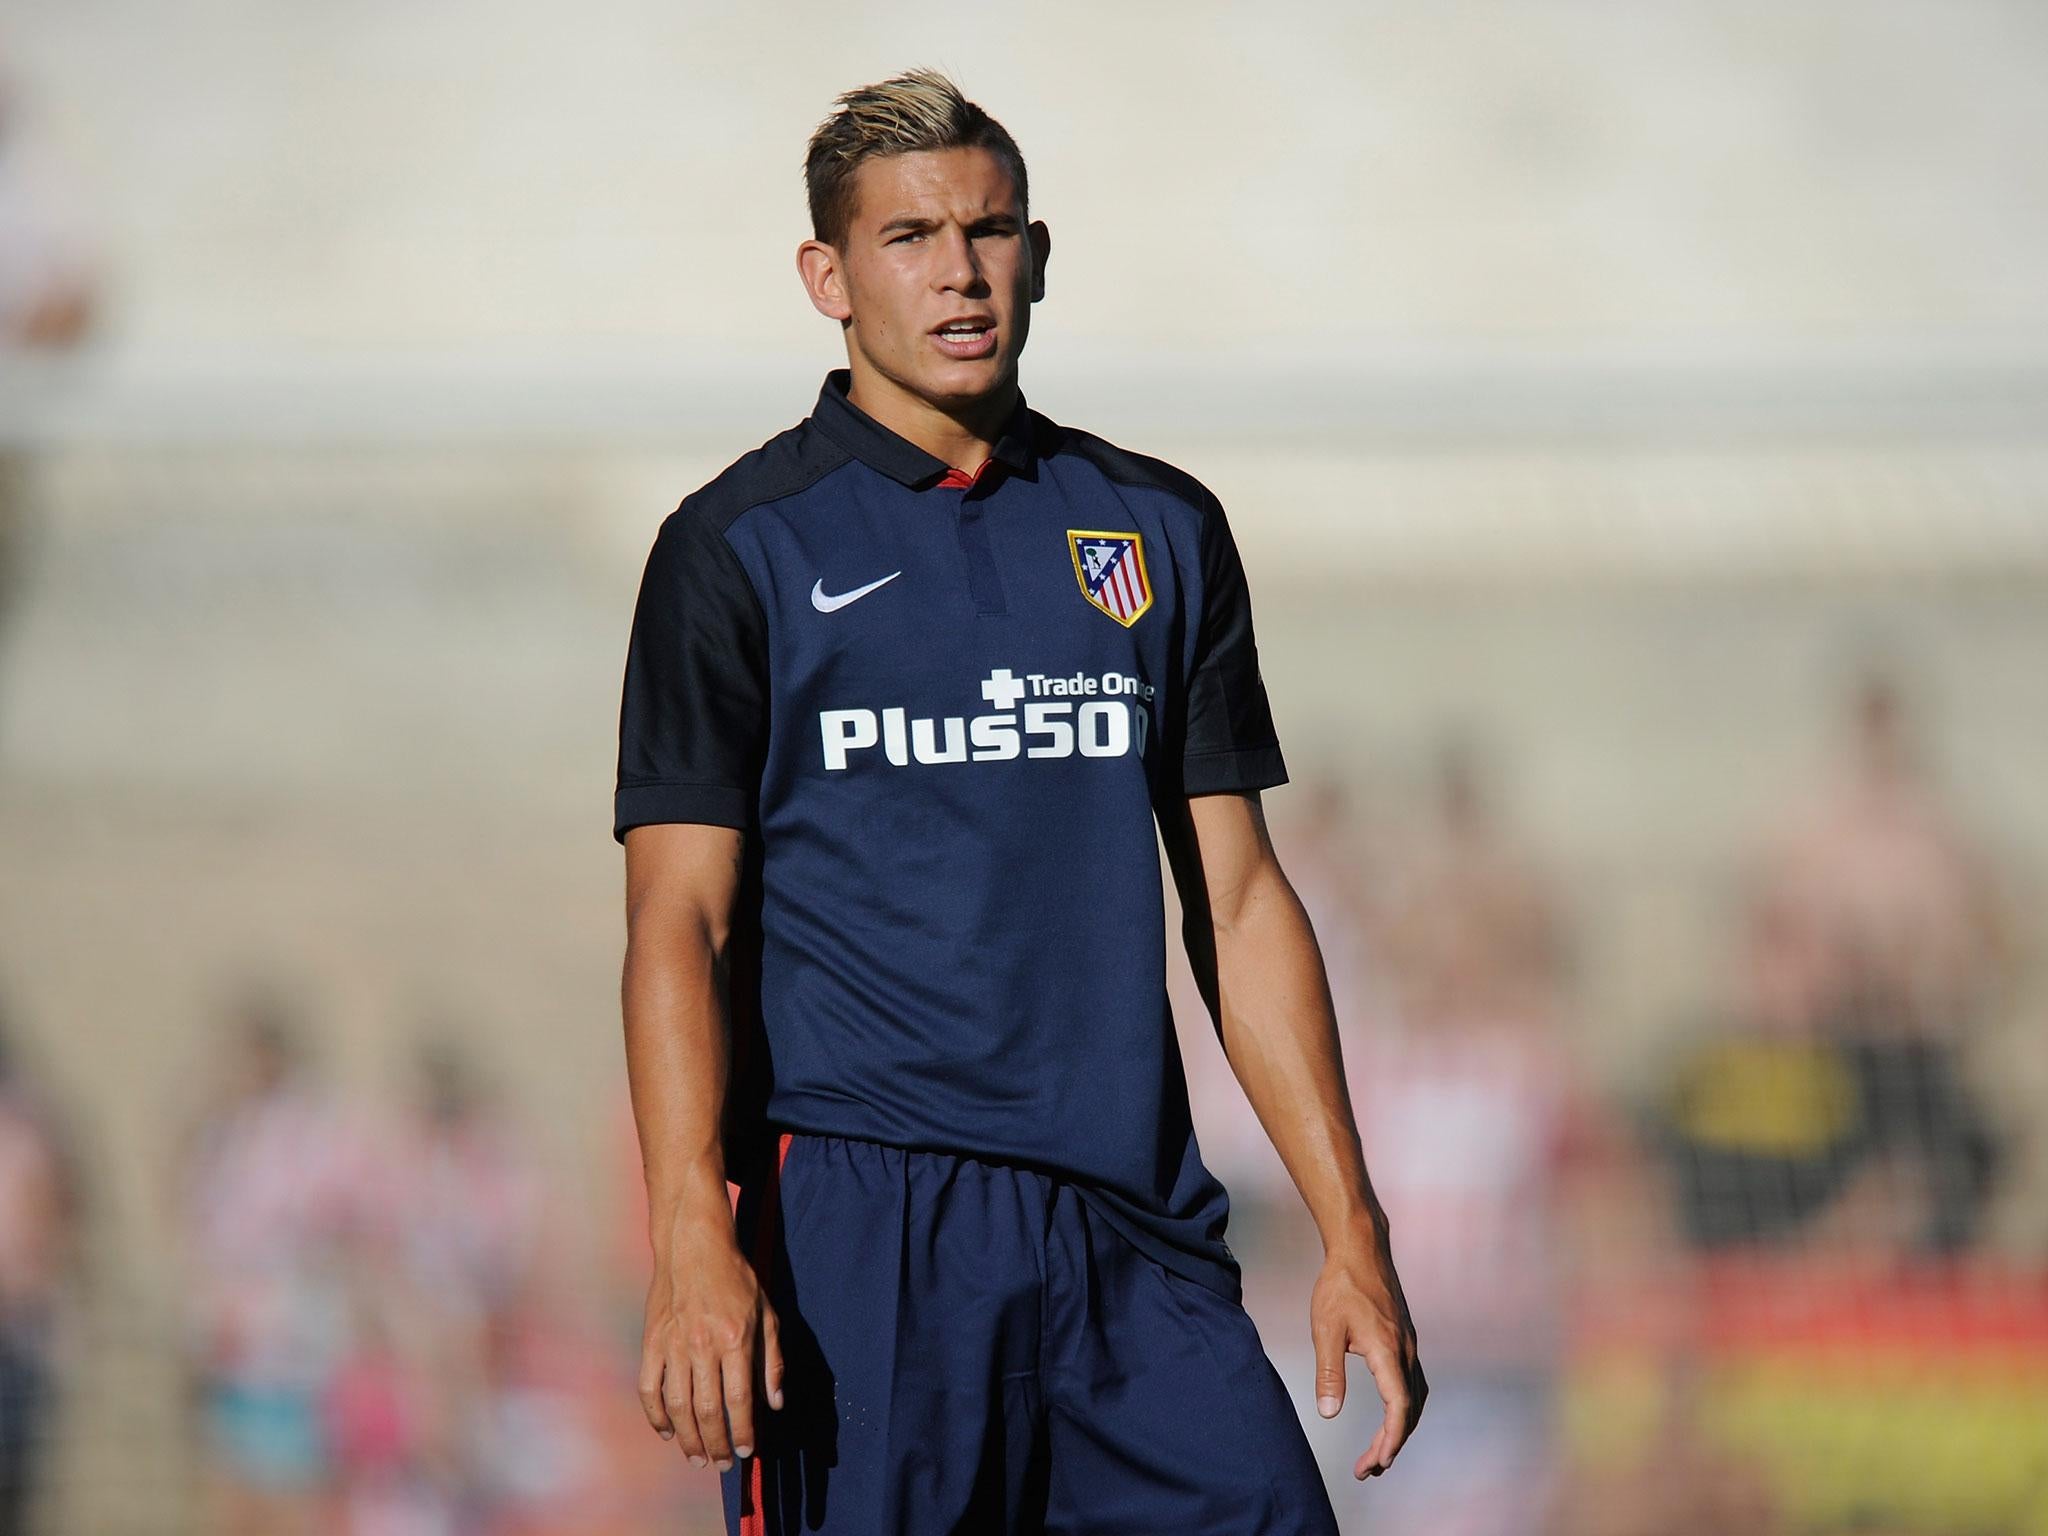 Atletico Madrid defender Lucas Hernandez has been arrested for allegedly assaulting his girlfriend